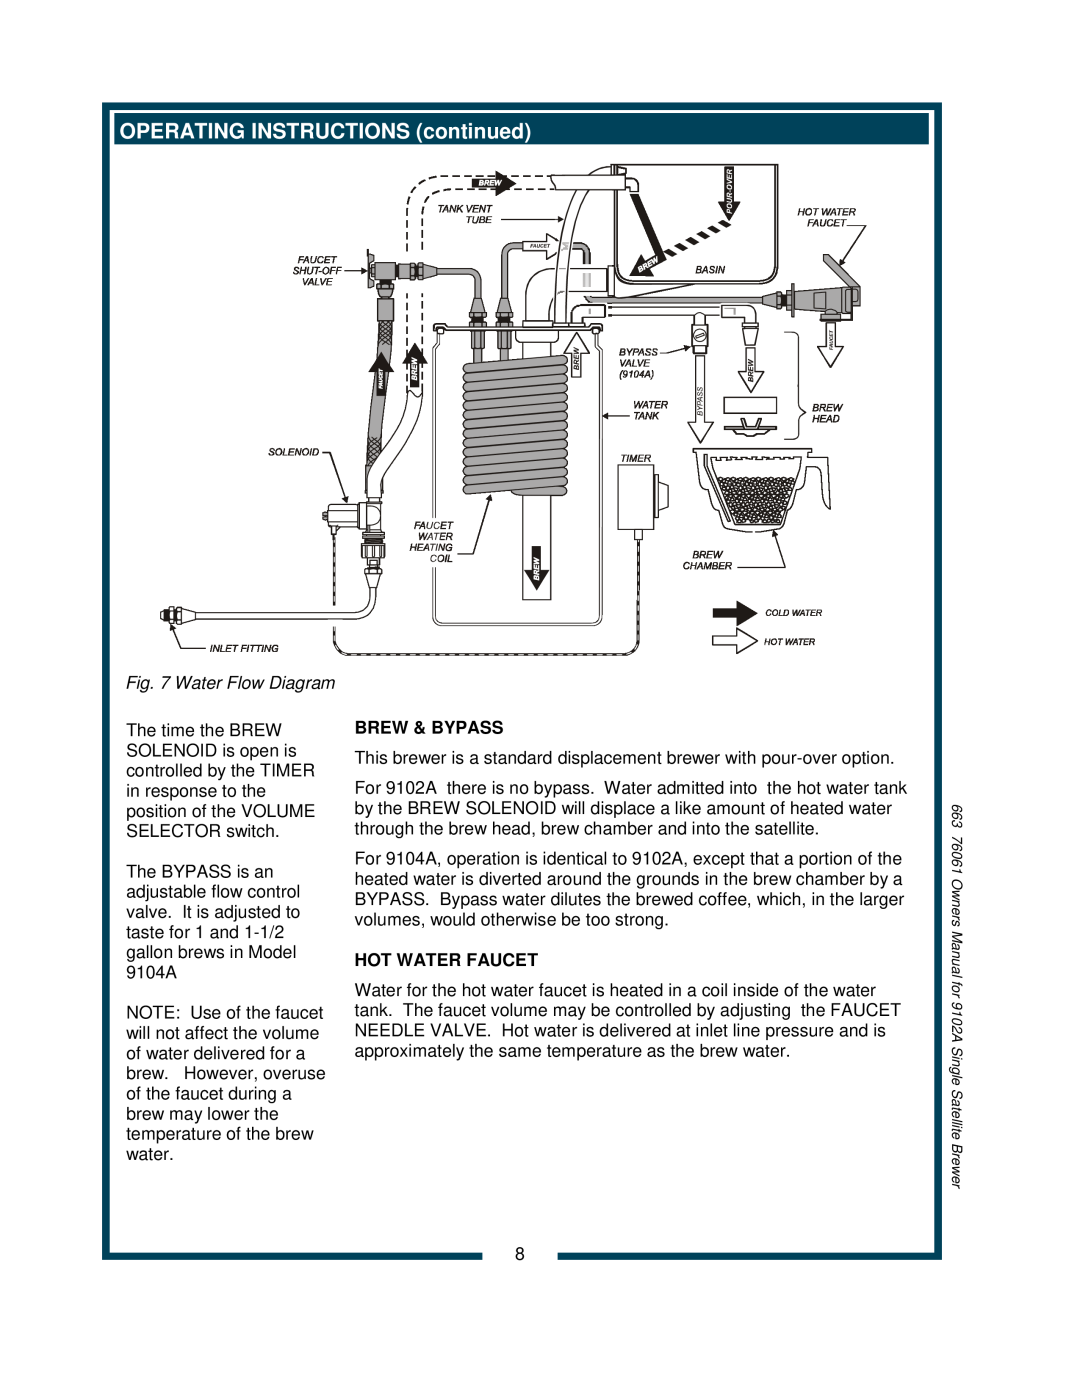 Bloomfield 9102A, 9104A owner manual OPERATING INSTRUCTIONS continued, Brew & Bypass, Hot Water Faucet 